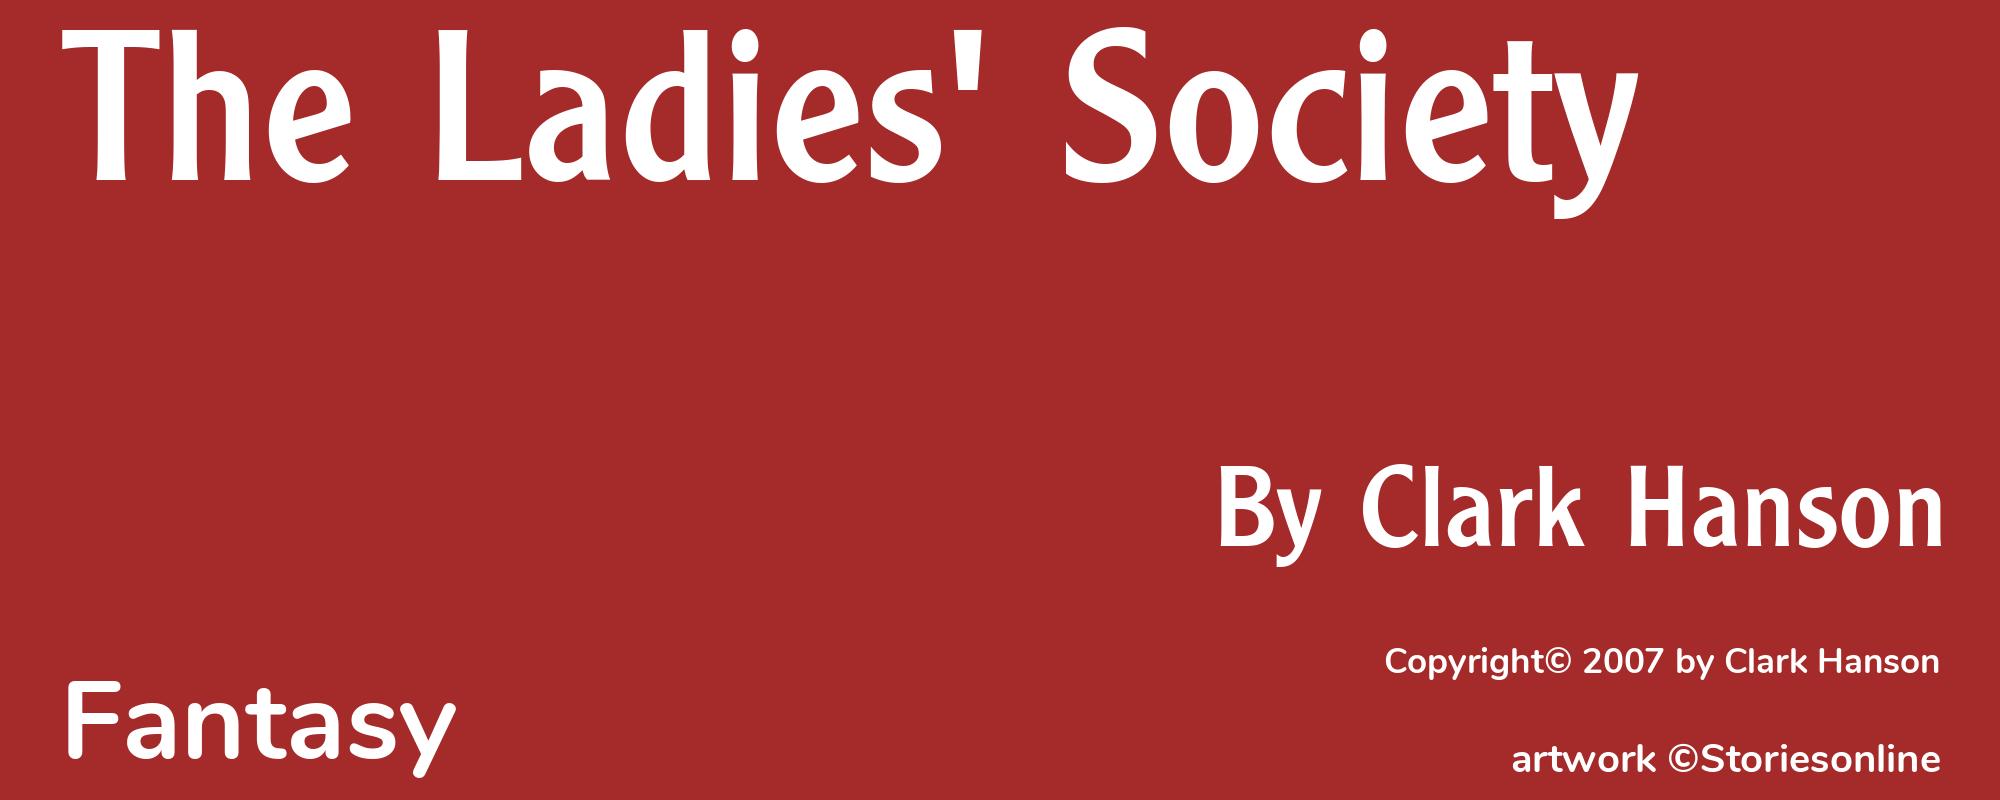 The Ladies' Society - Cover